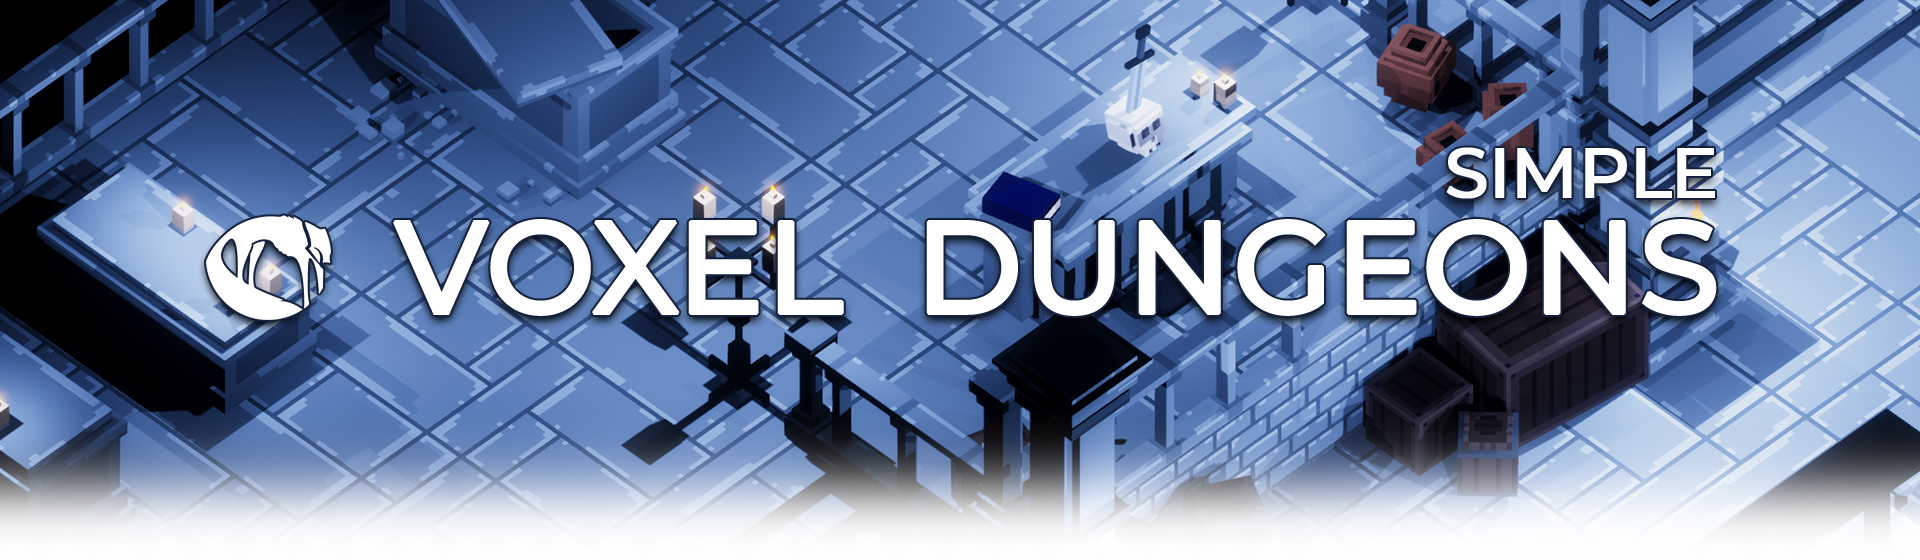 Voxel - Simple Dungeons